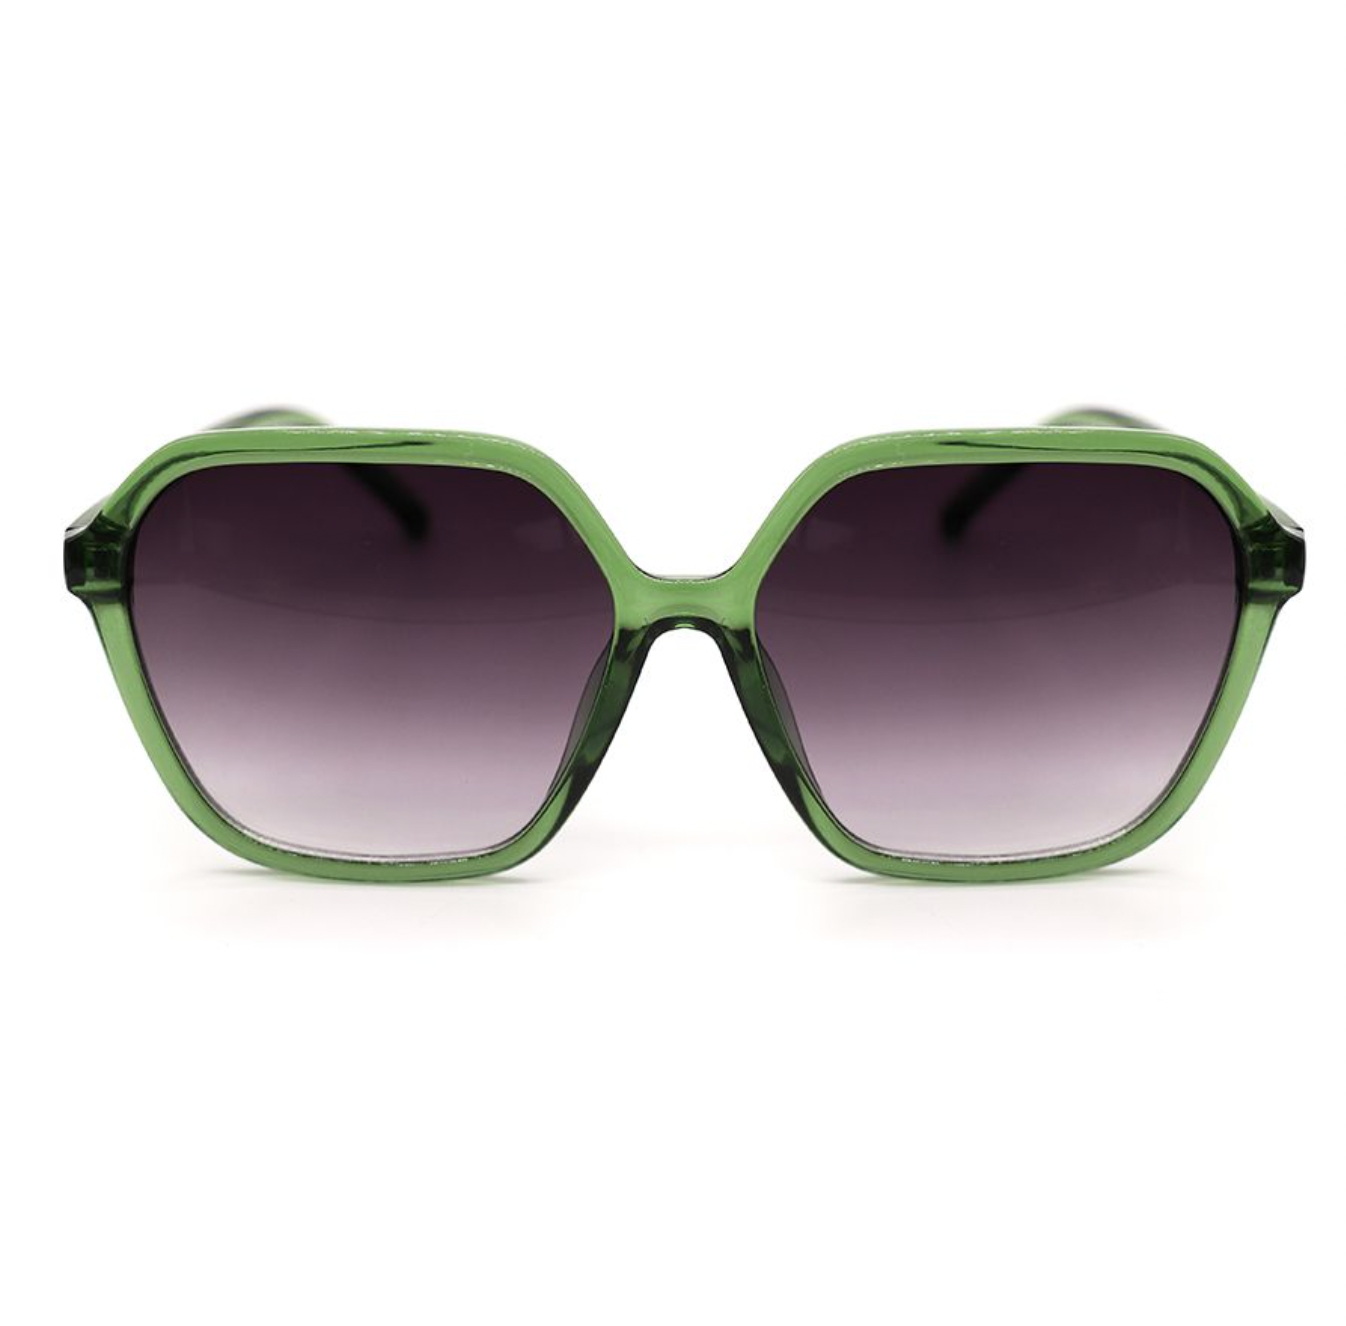 POM Emerald green recycled material sunglasses